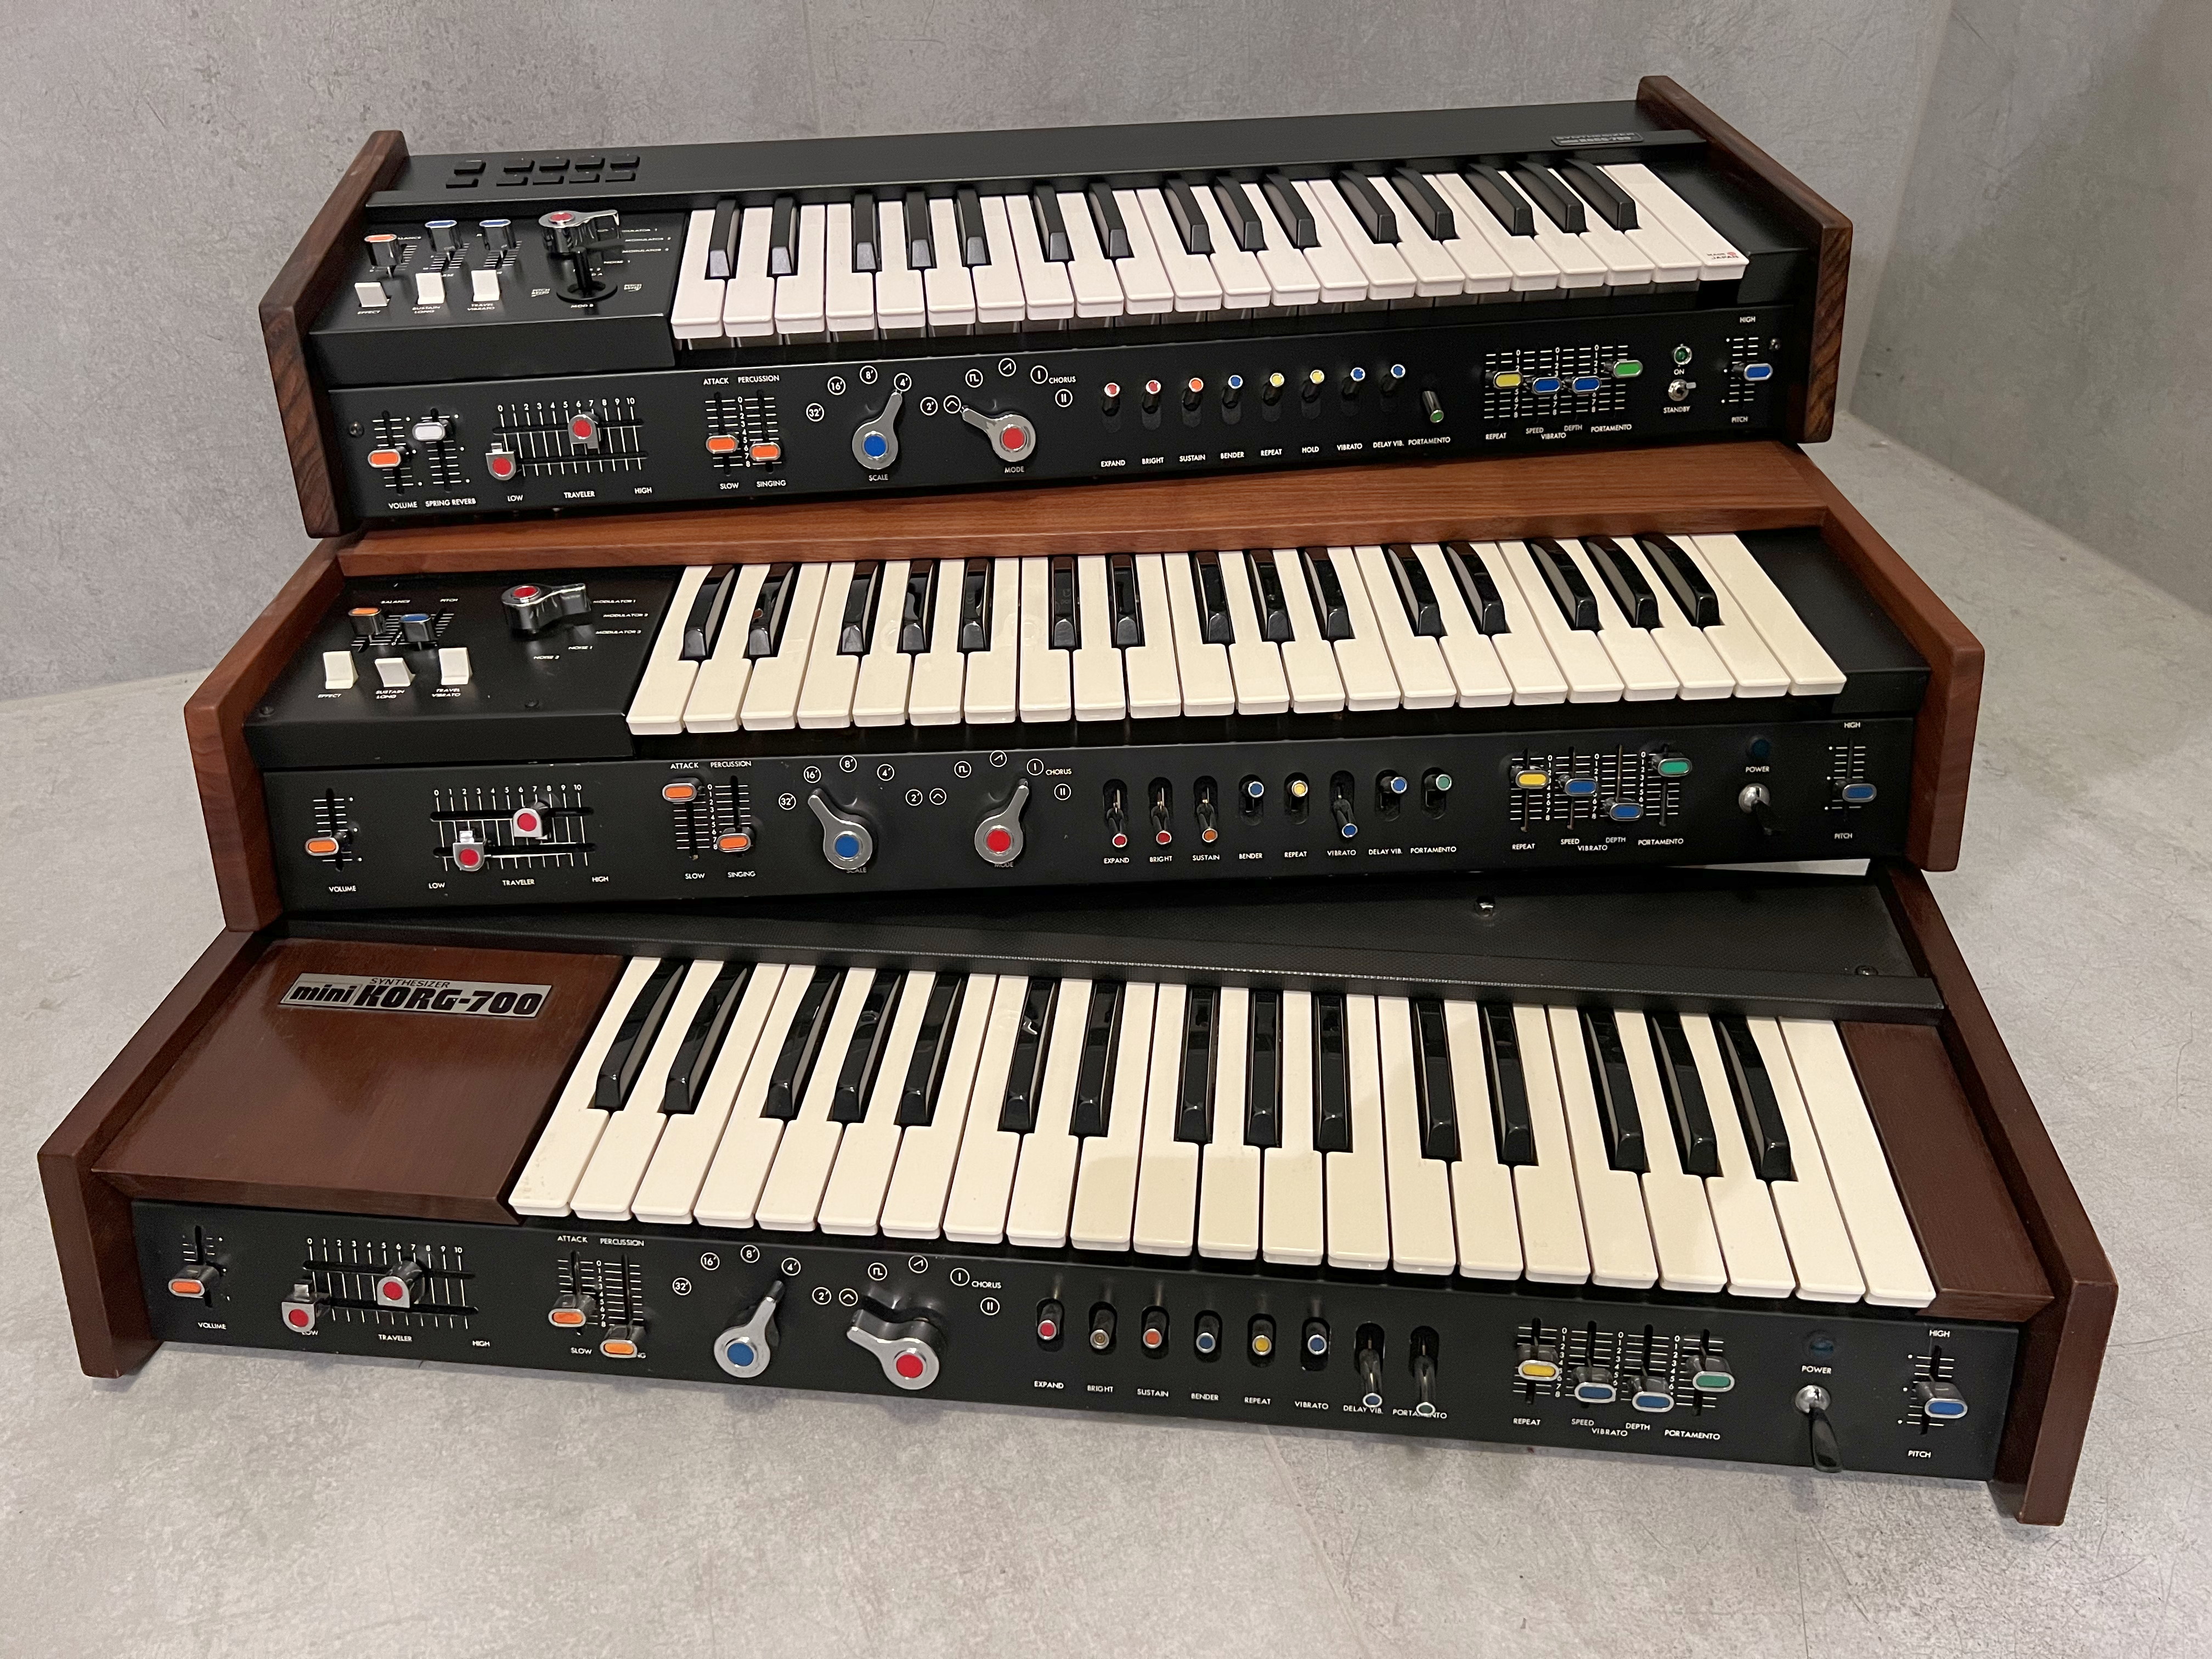 miniKorg_700_and%20700S_and_700FS_Front.jpg